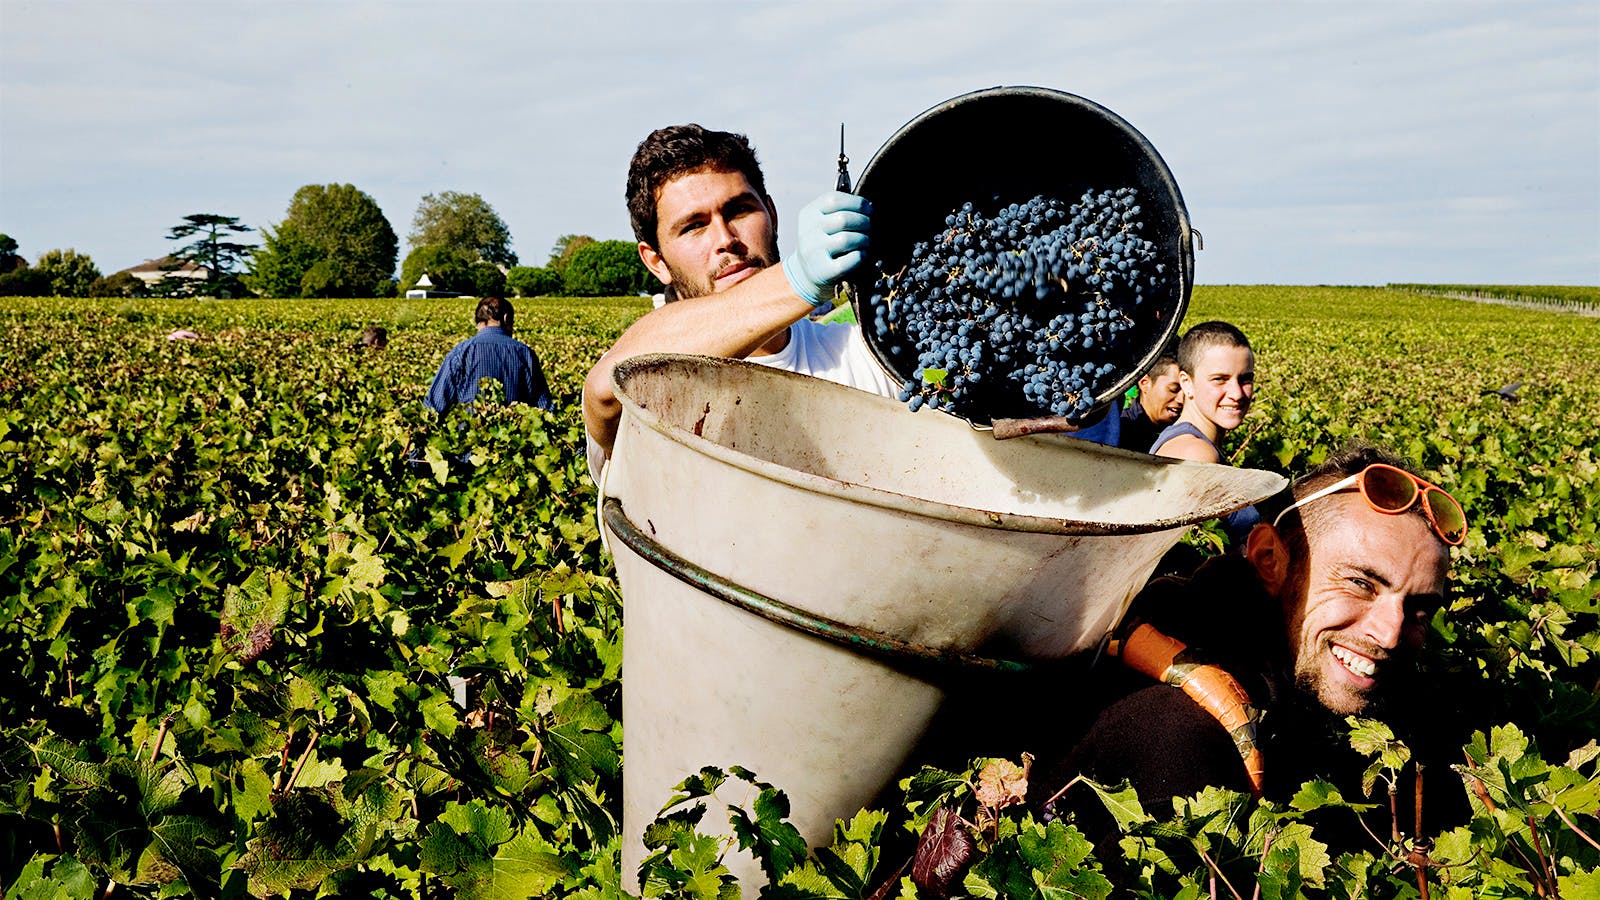 Wine Harvest 2015: Bordeaux Winemakers Believe the Vintage Is a Potential Classic